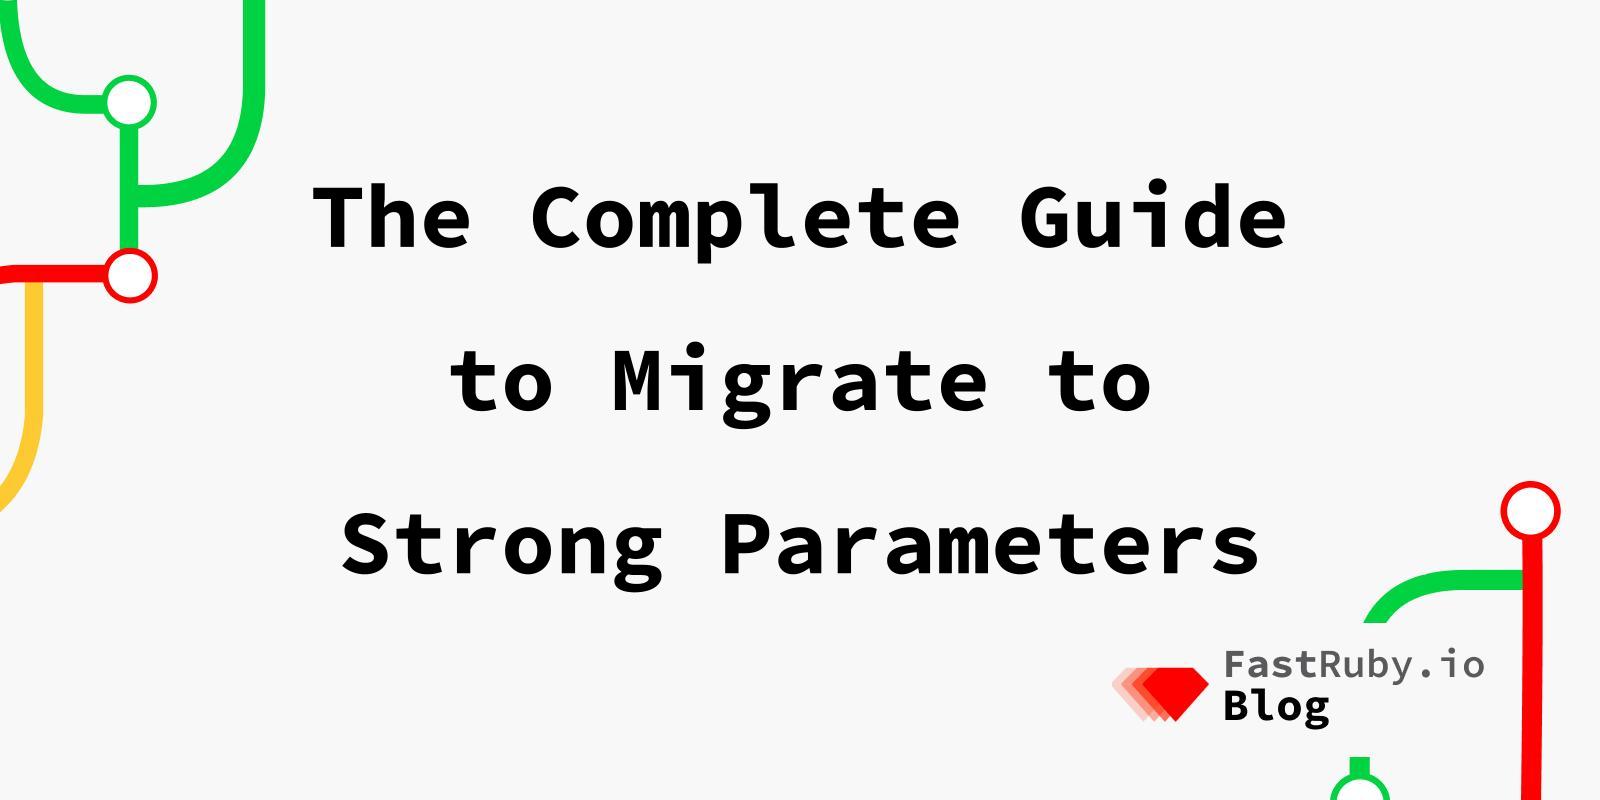 The Complete Guide to Migrate to Strong Parameters